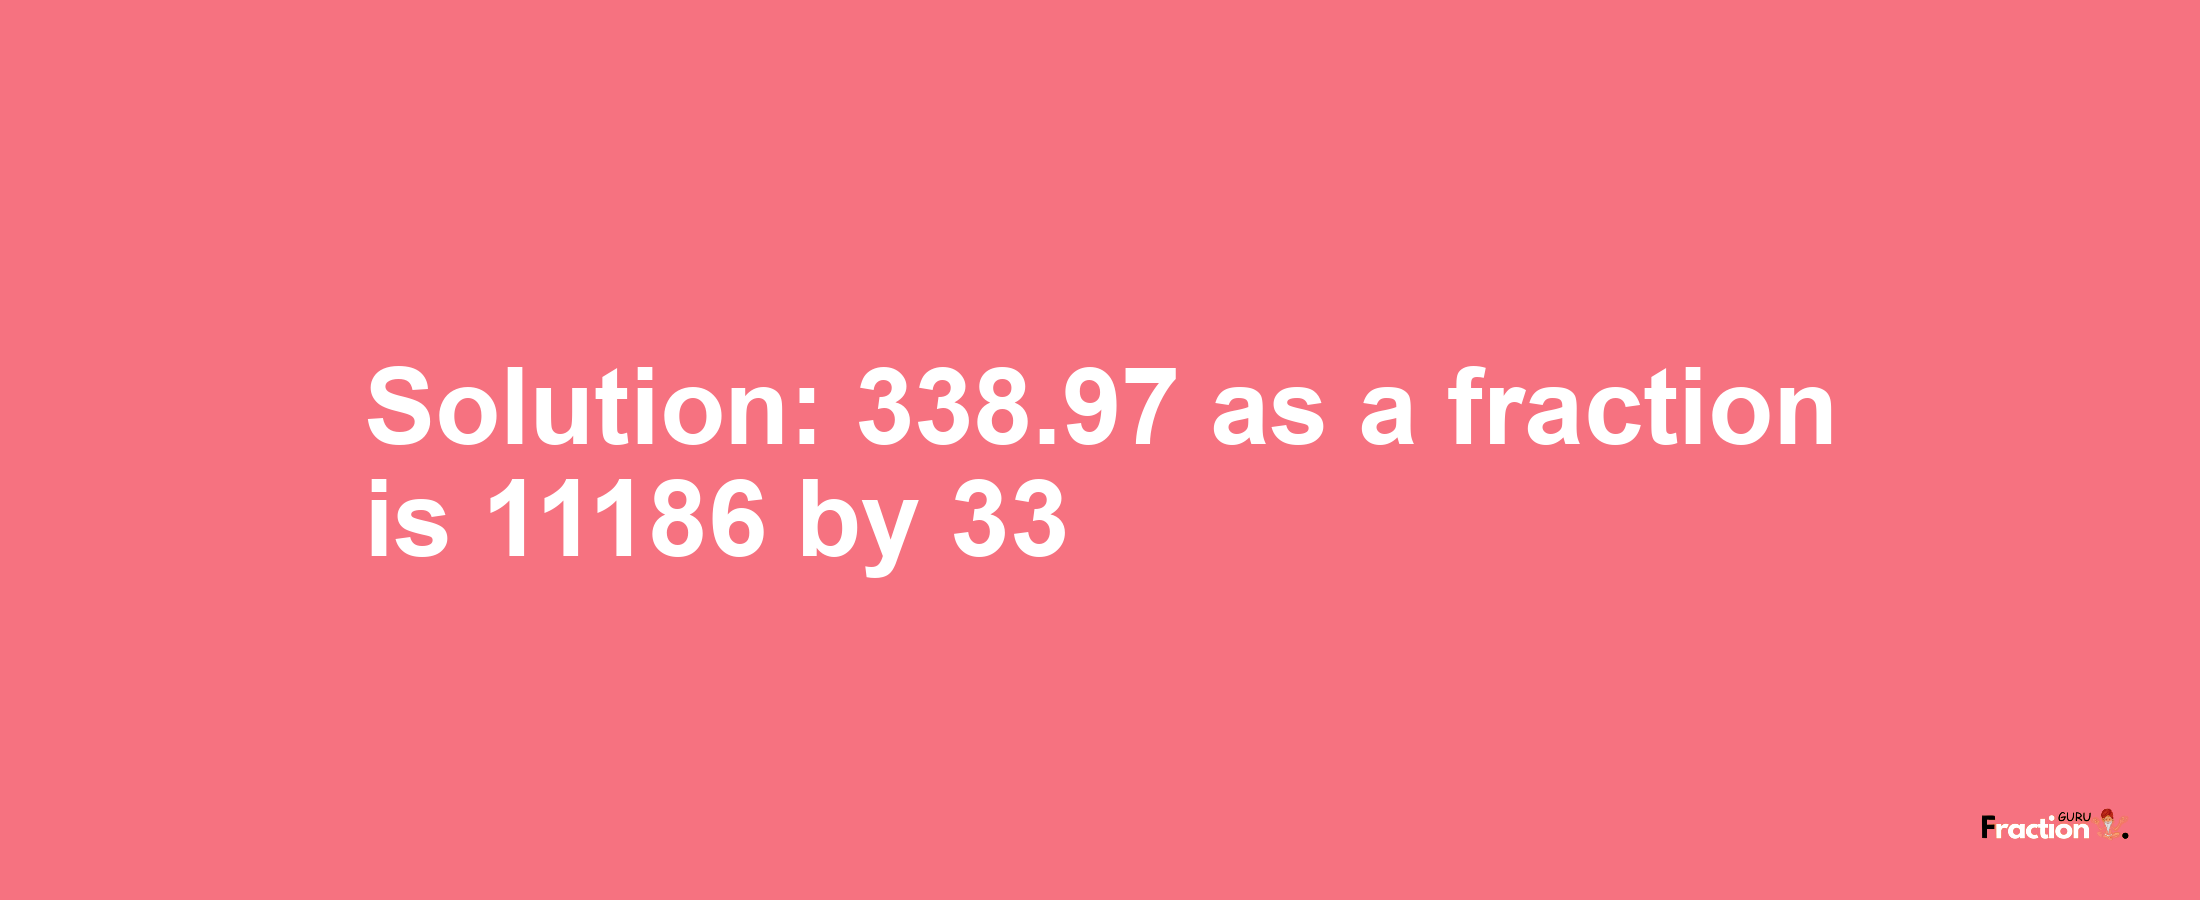 Solution:338.97 as a fraction is 11186/33